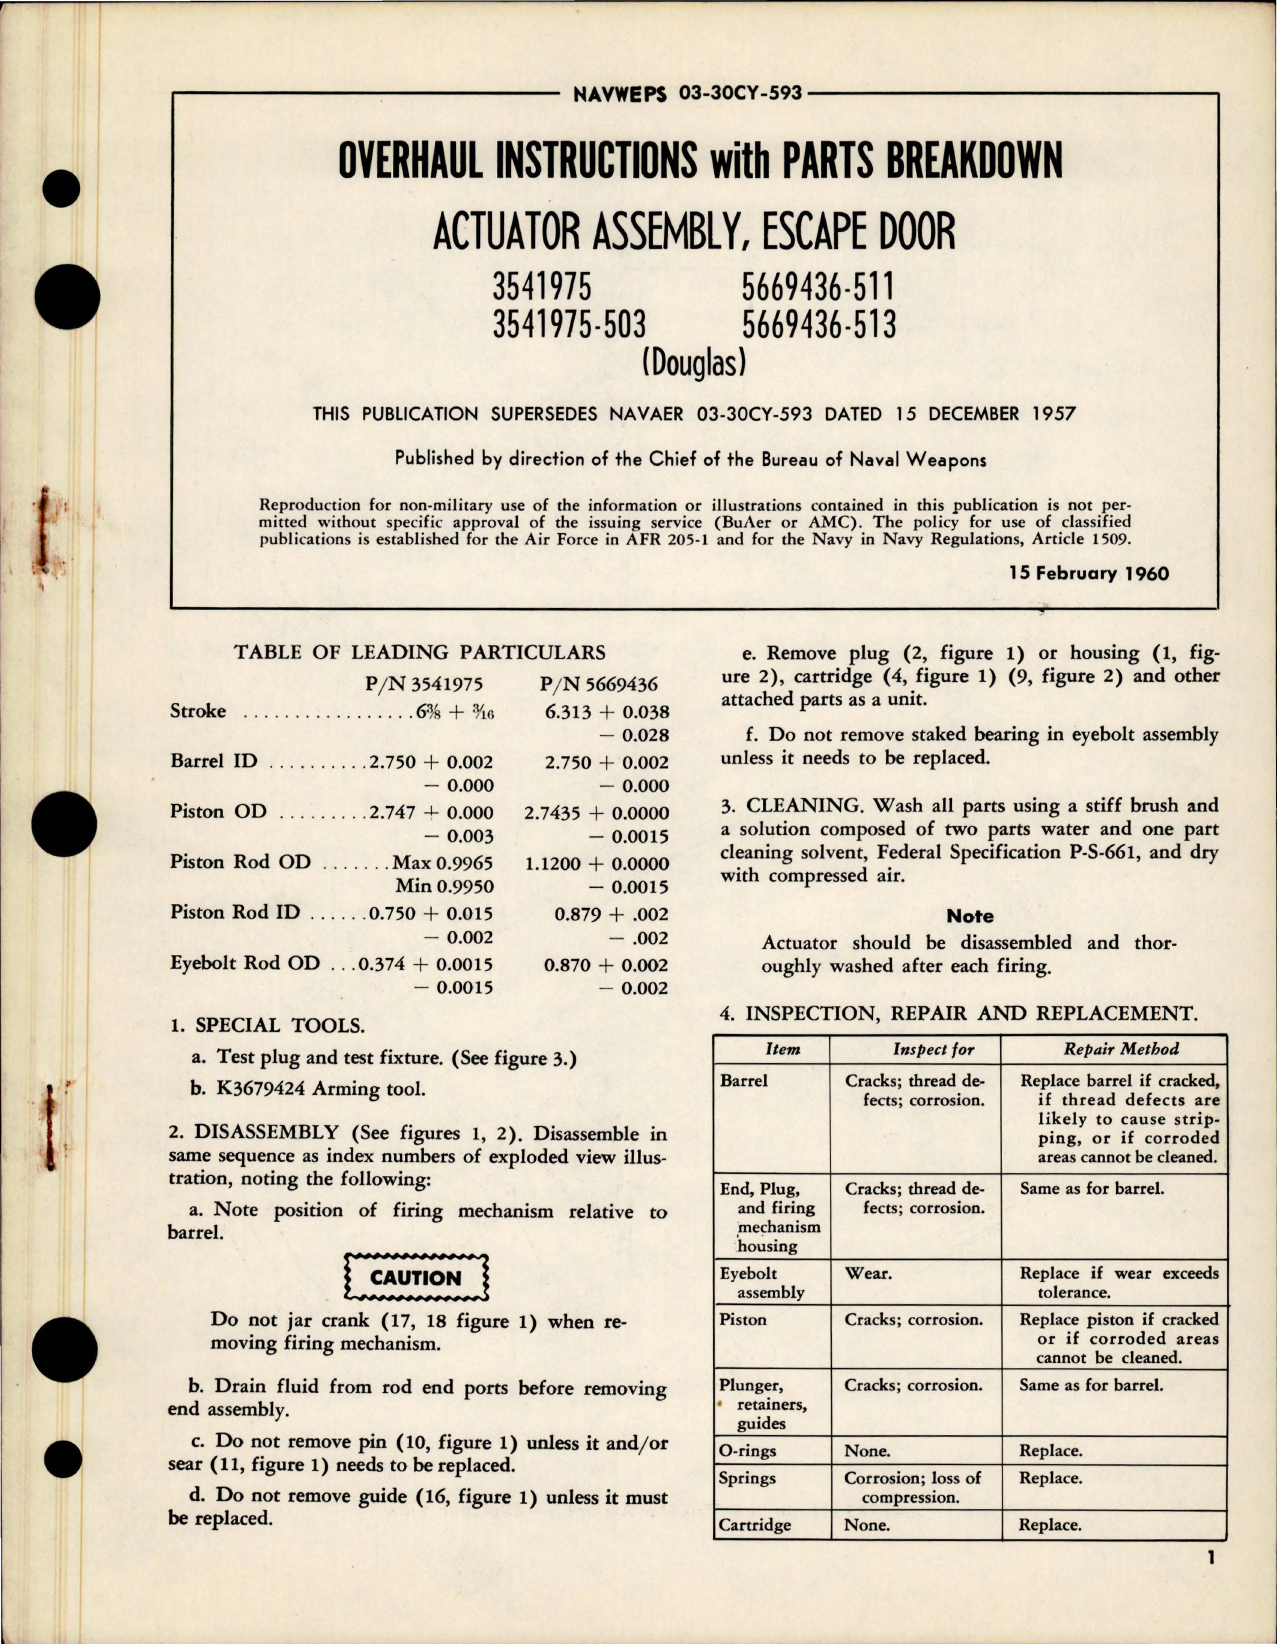 Sample page 1 from AirCorps Library document: Overhaul Instructions with Parts Breakdown for Escape Door Actuator Assembly